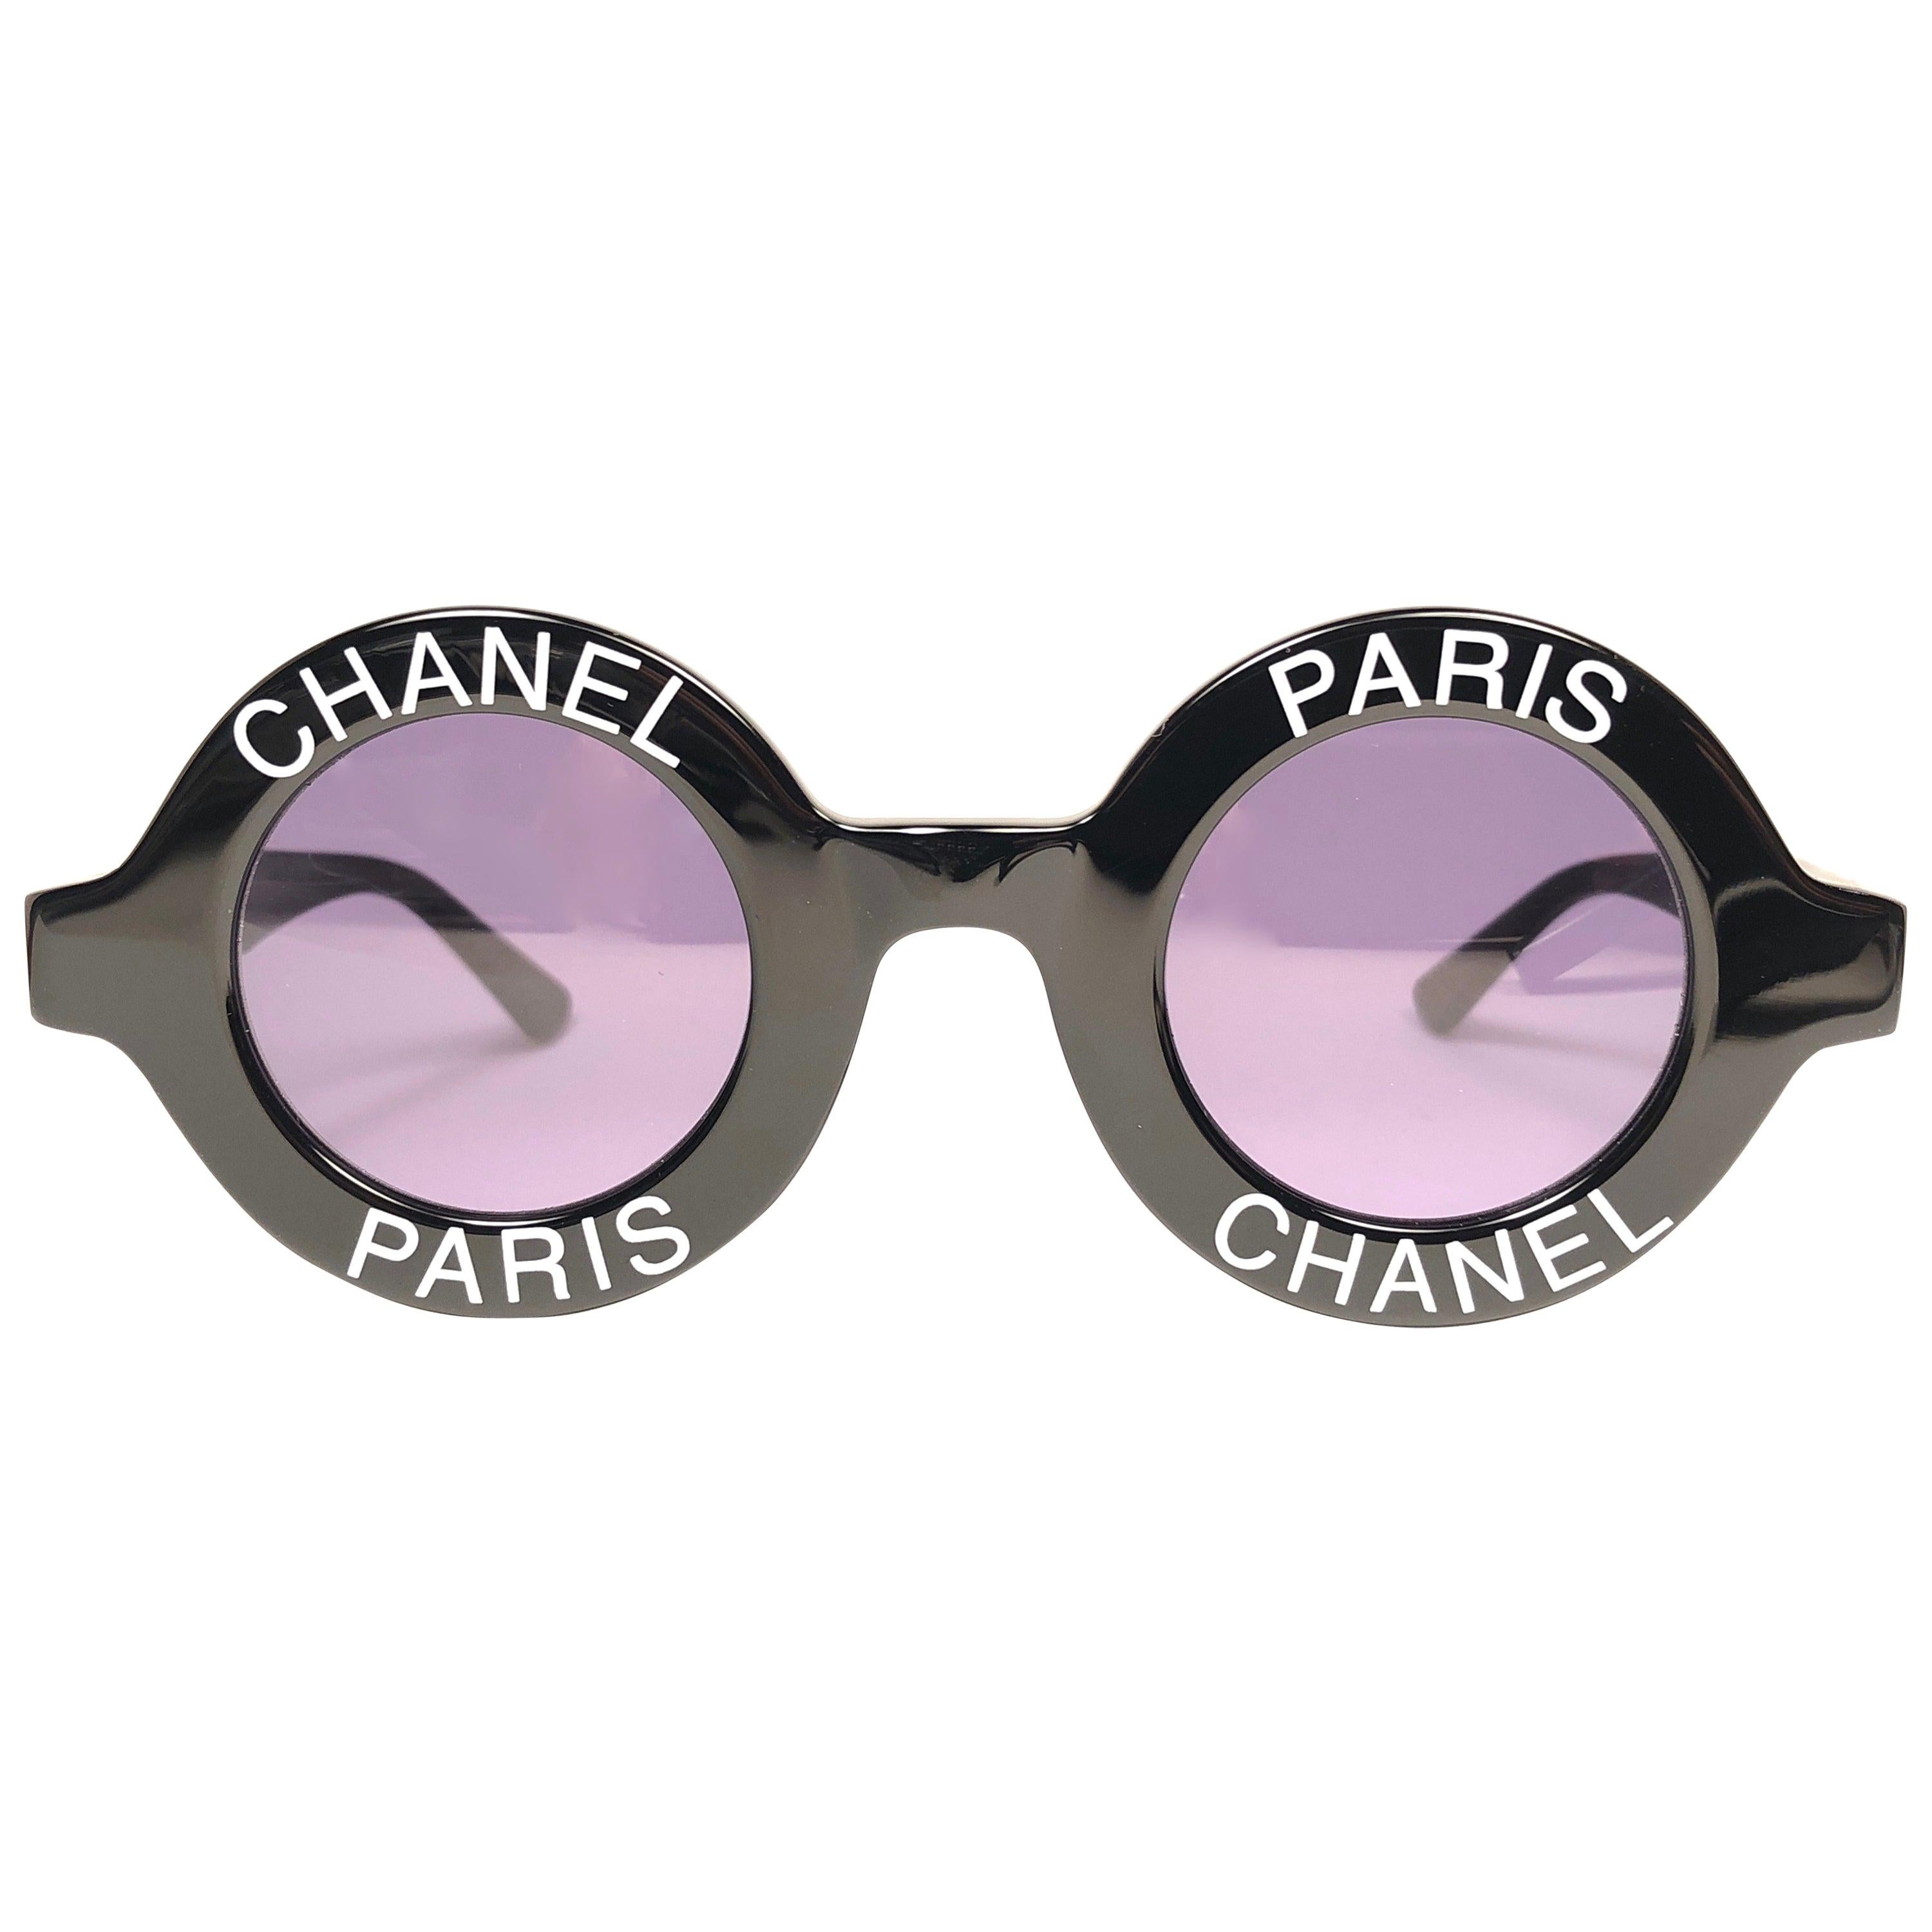 New Vintage Chanel Iconic Round " Chanel Paris " Black Sunglasses Made In Italy